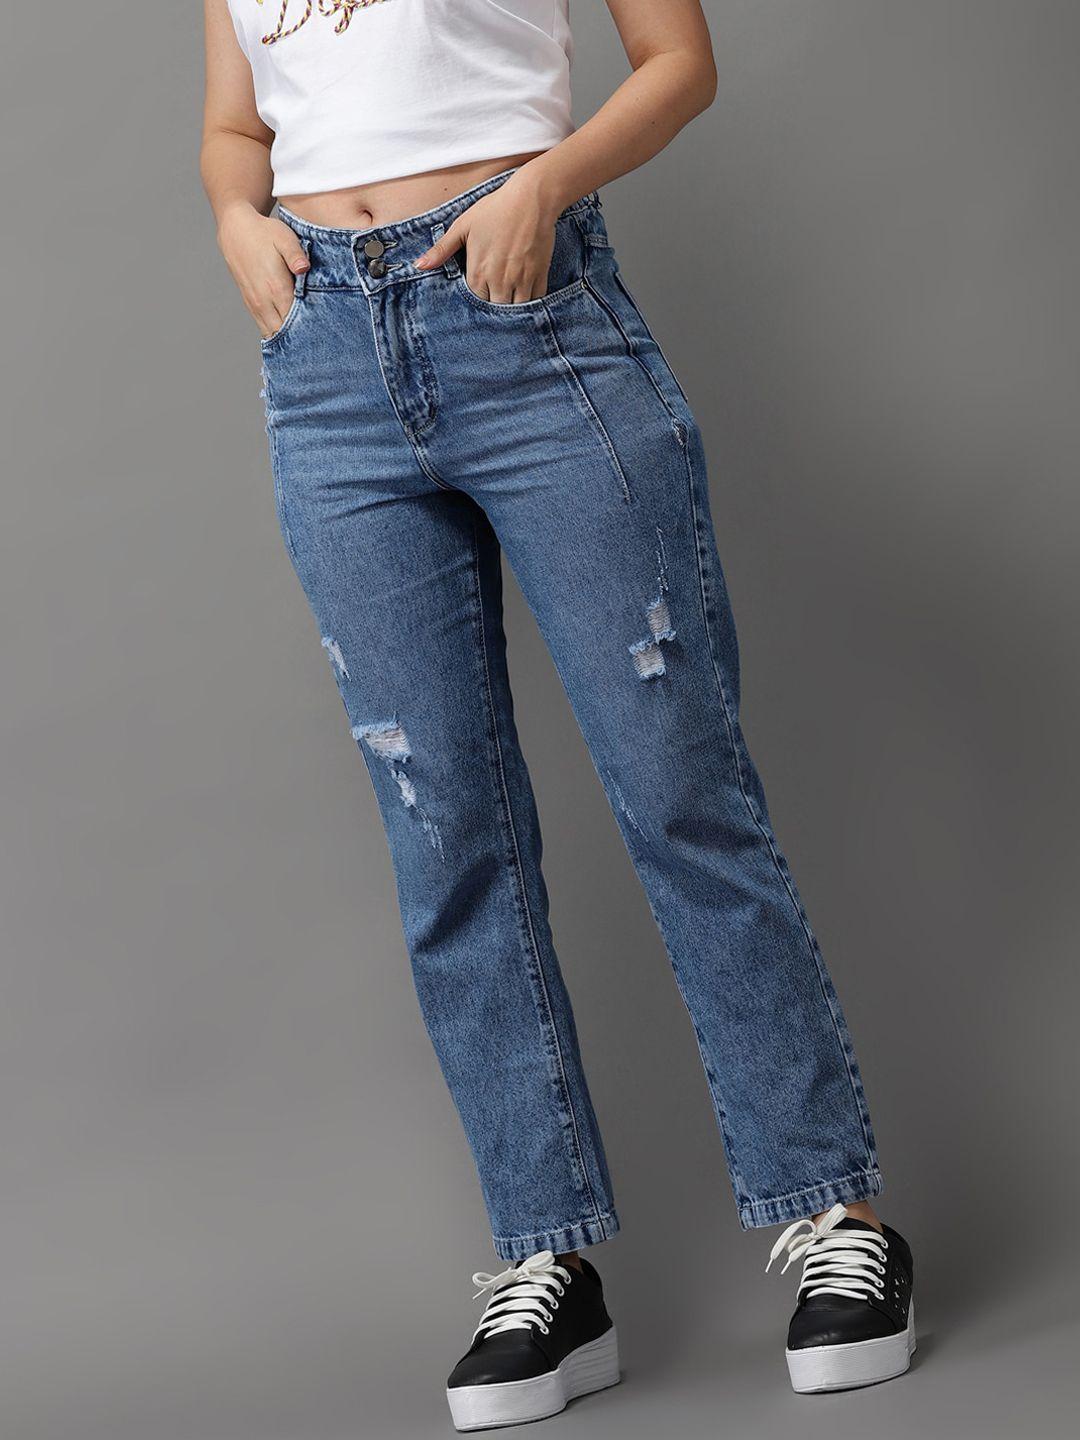 showoff women blue jean straight fit high-rise mildly distressed light fade jeans